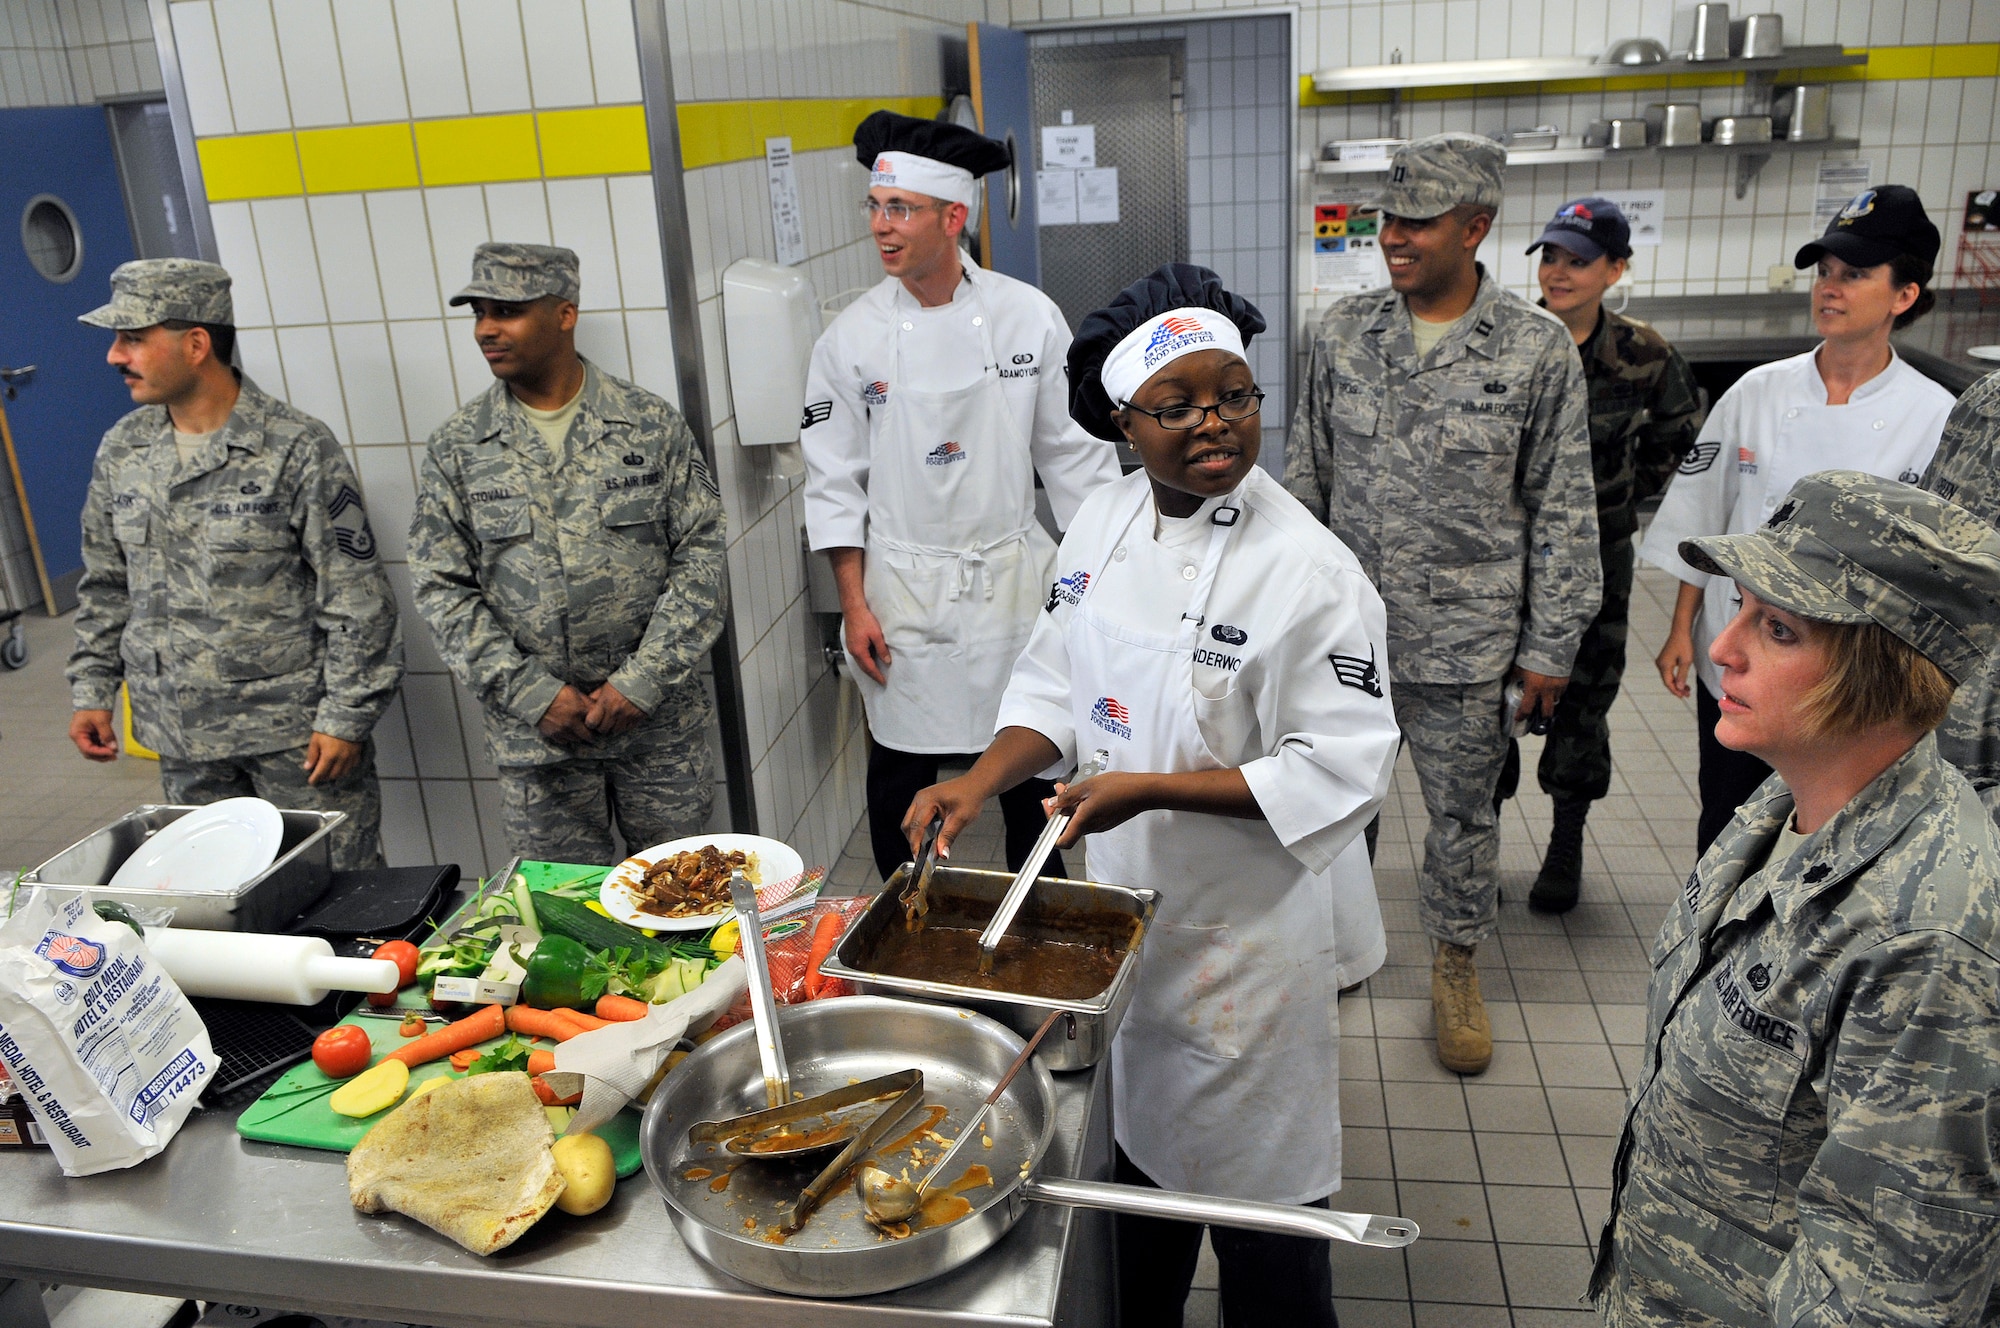 U.S. Air Force airmen from the 435th Services Squadron participate in the second round of the Top Chef Competition at the Lindberg Hof Dining Facility on Kapaun Air Station June 17, 2009. (U.S. Air Force photo by Staff Sgt. Stephen J. Otero)